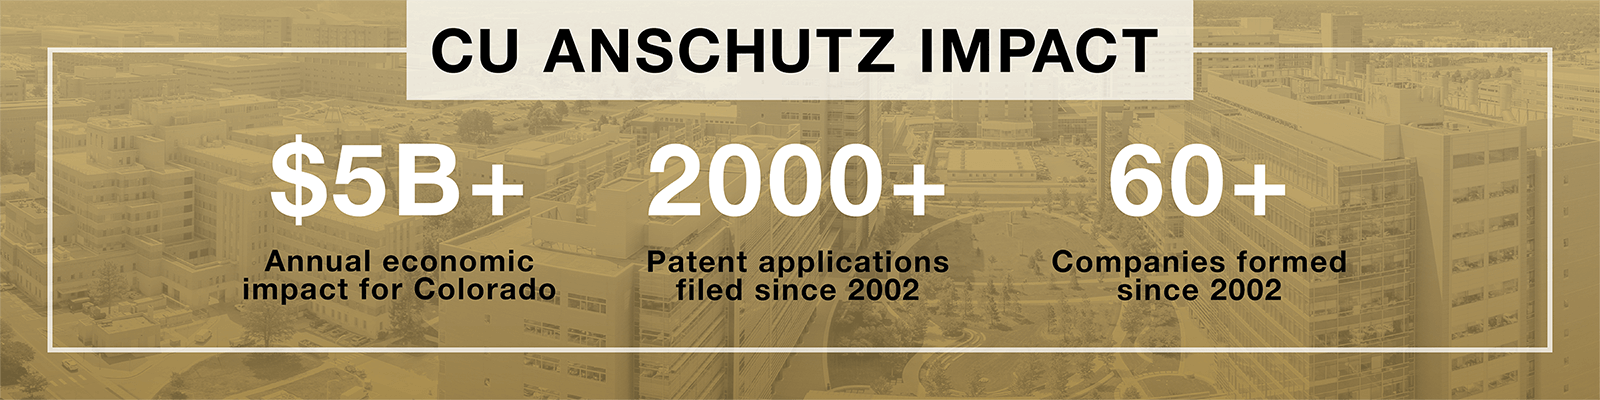 CU Anschutz impacts: $5+ billion annual economic impact for Colorado. 2000+ patent applications filed since 2002. 60+ companies formed since 2002